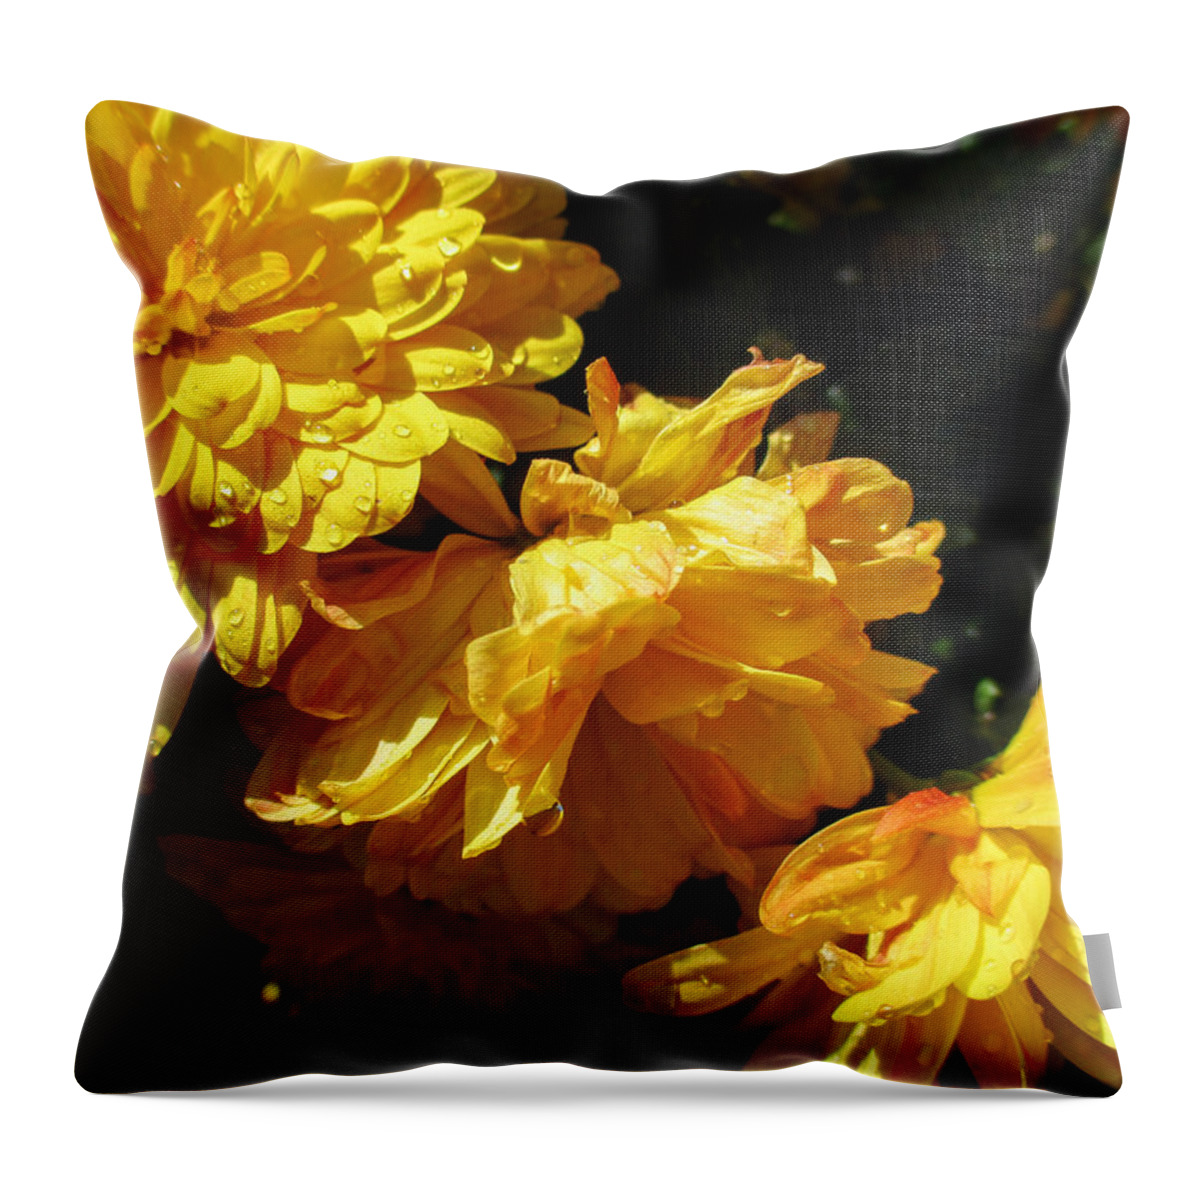 Calendula Officinalis Throw Pillow featuring the photograph Very Yellow Marigolds by W Craig Photography